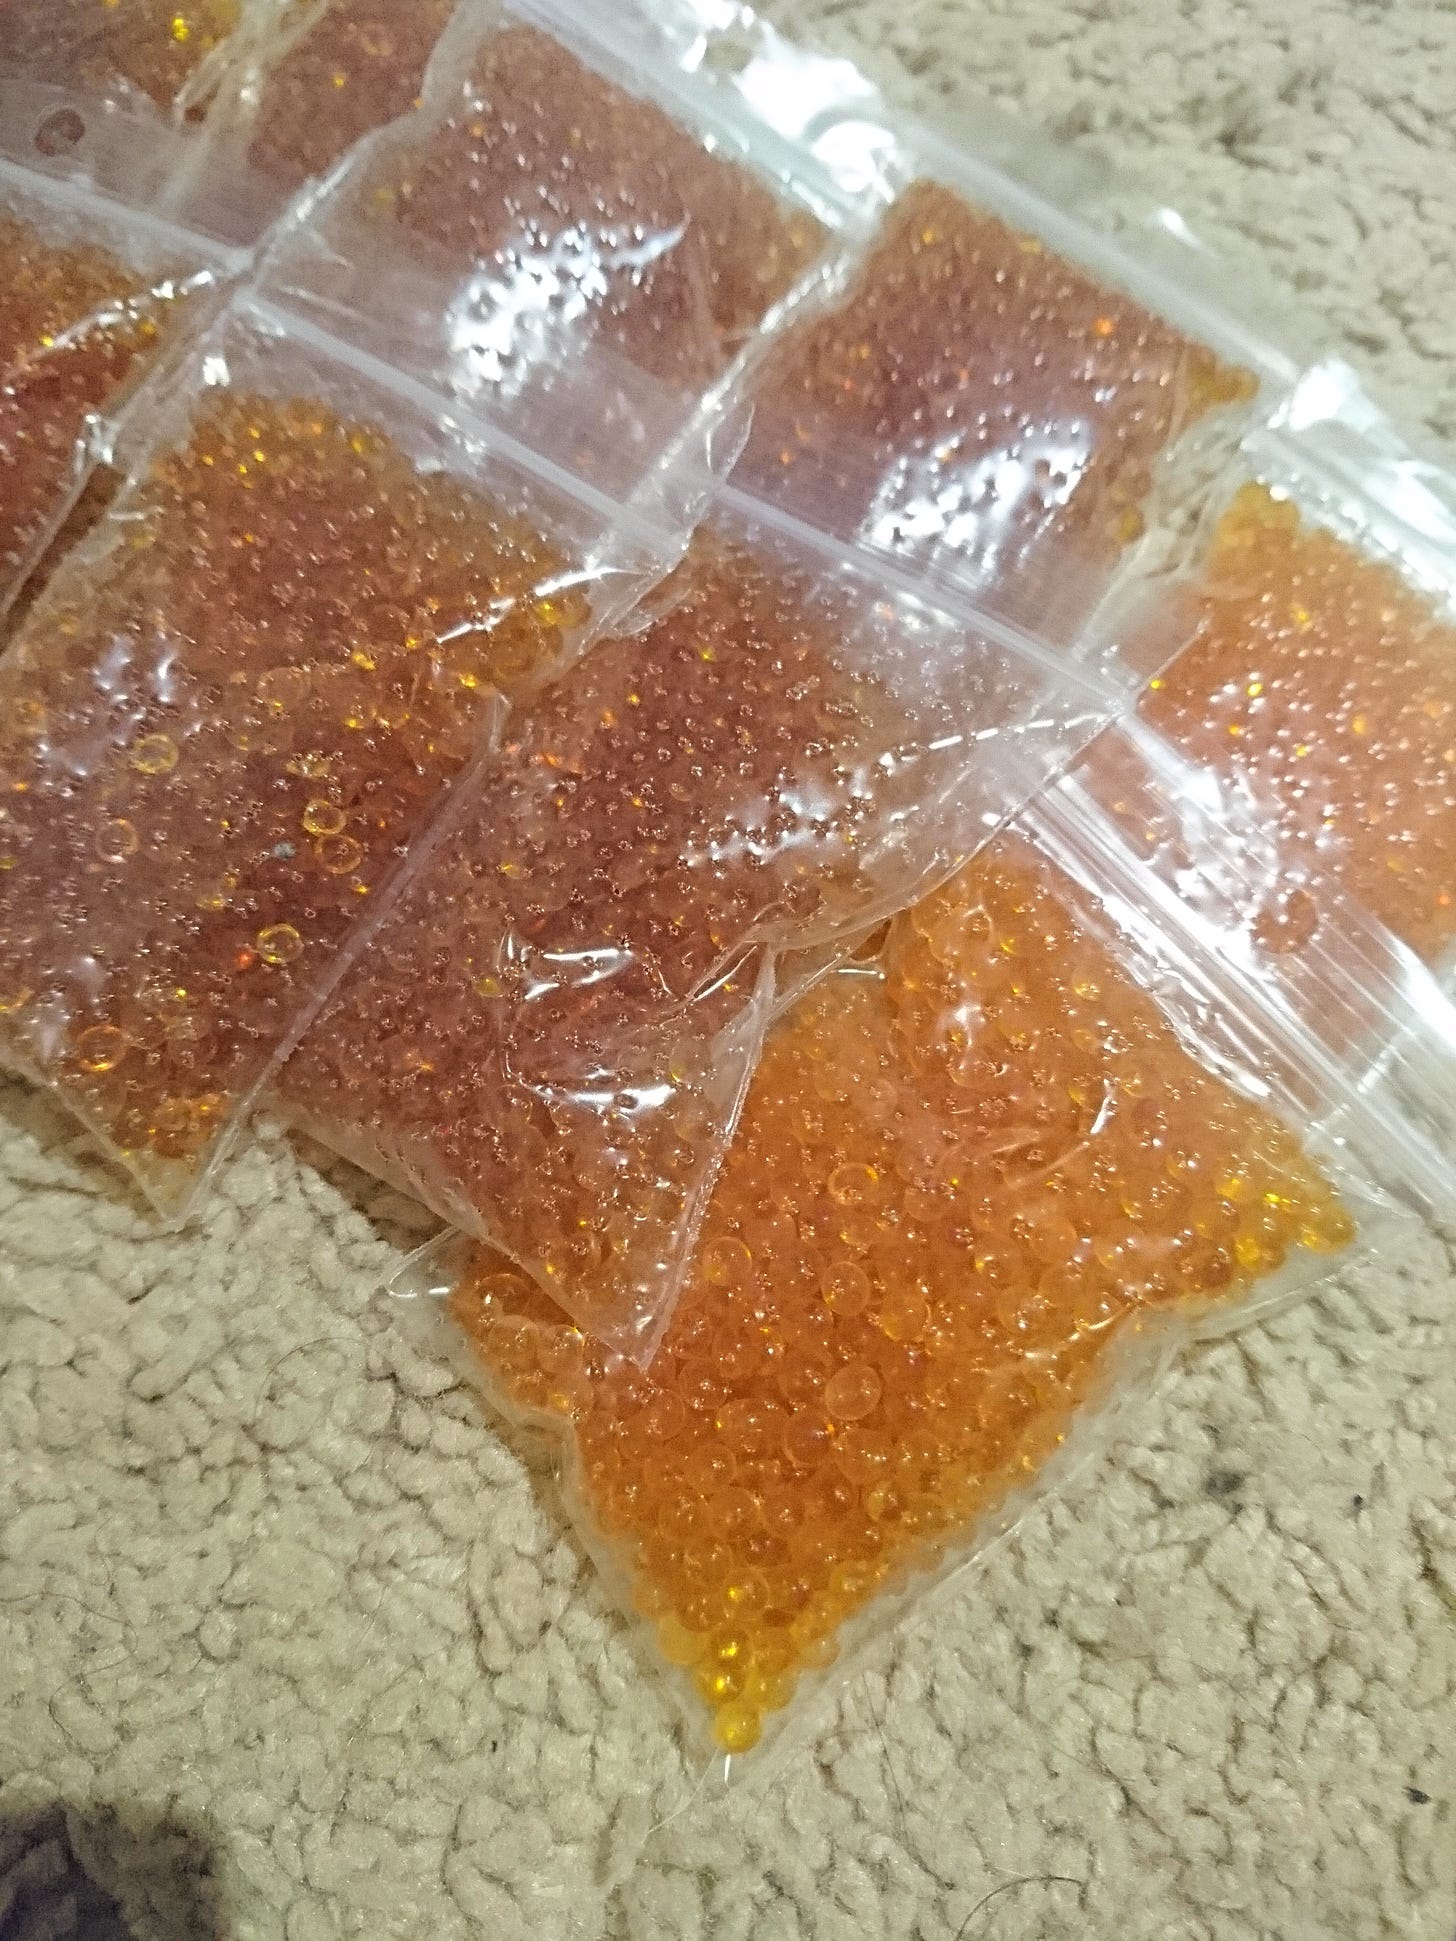 several bags of dehydrated dessicant beads